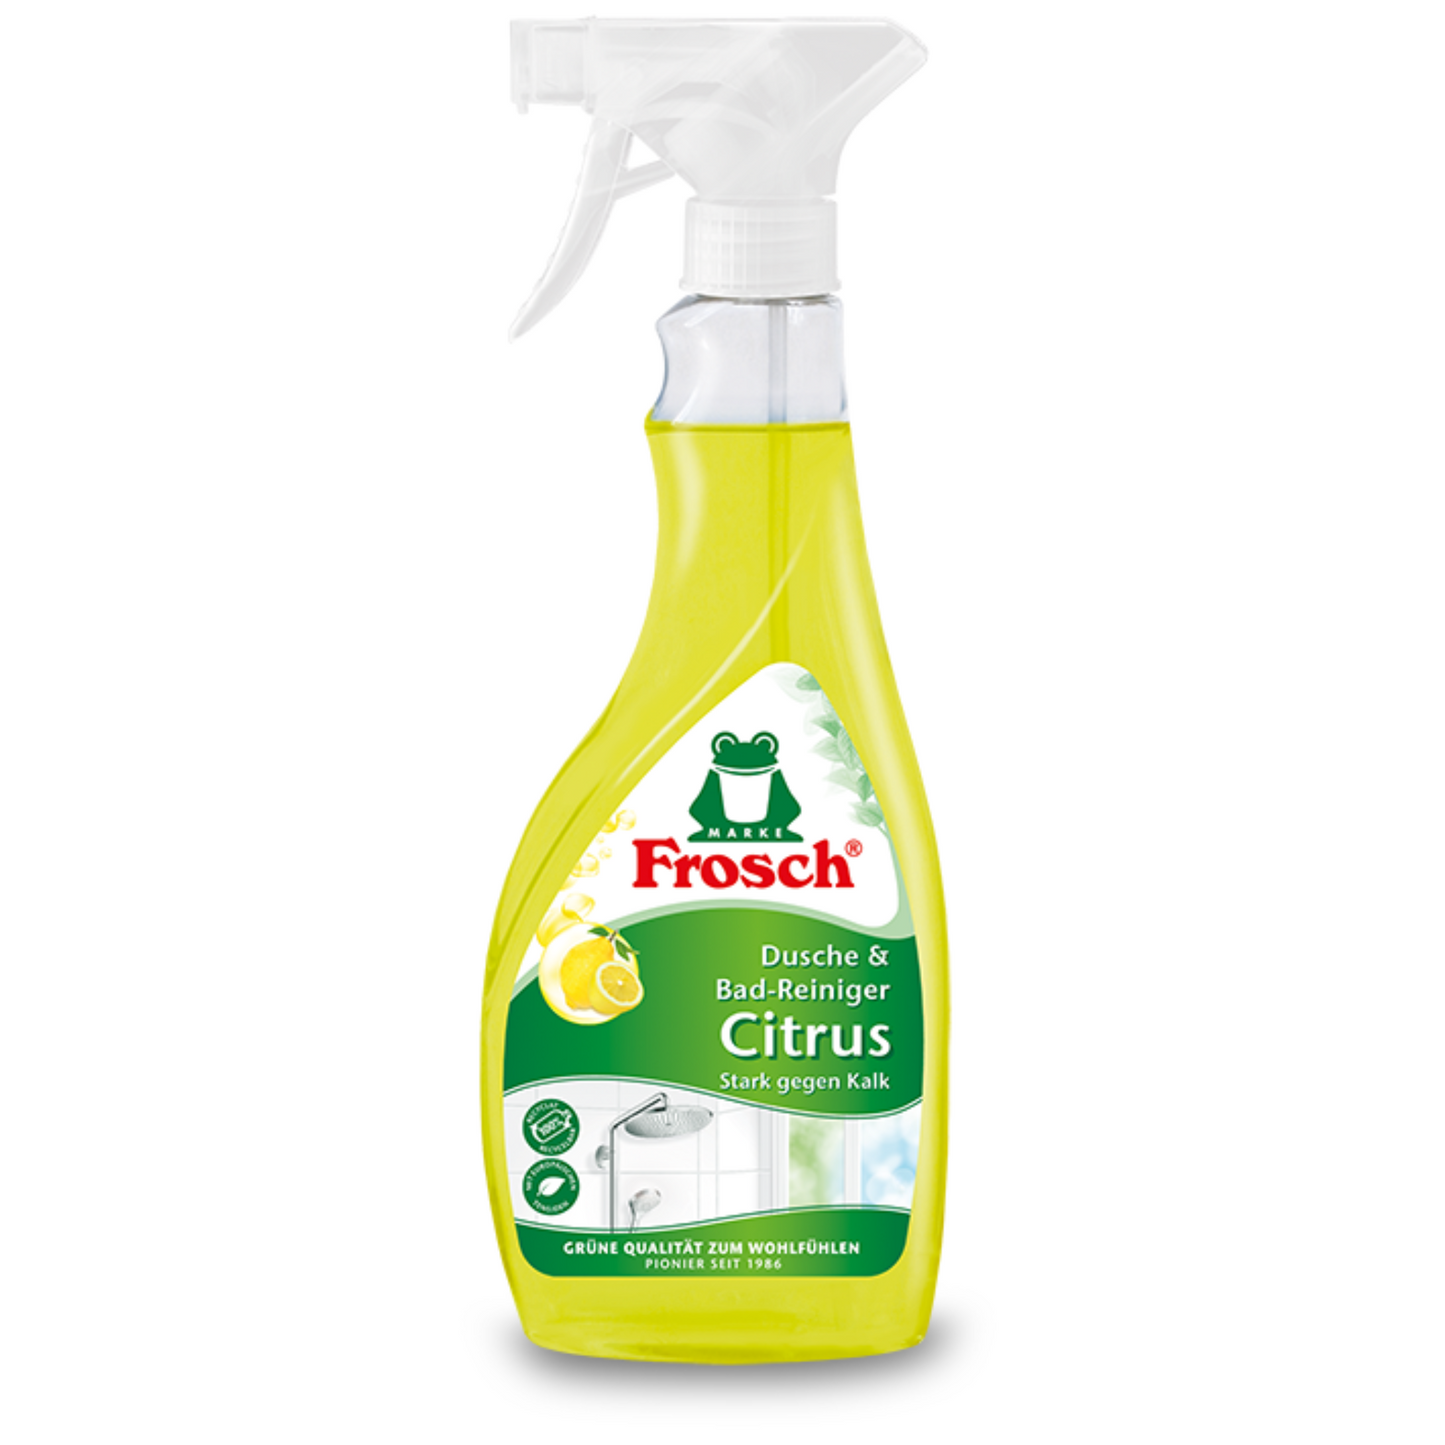 Primary Image of Frosch Citrus Shower and Bath Cleaning Spray (500 ml)